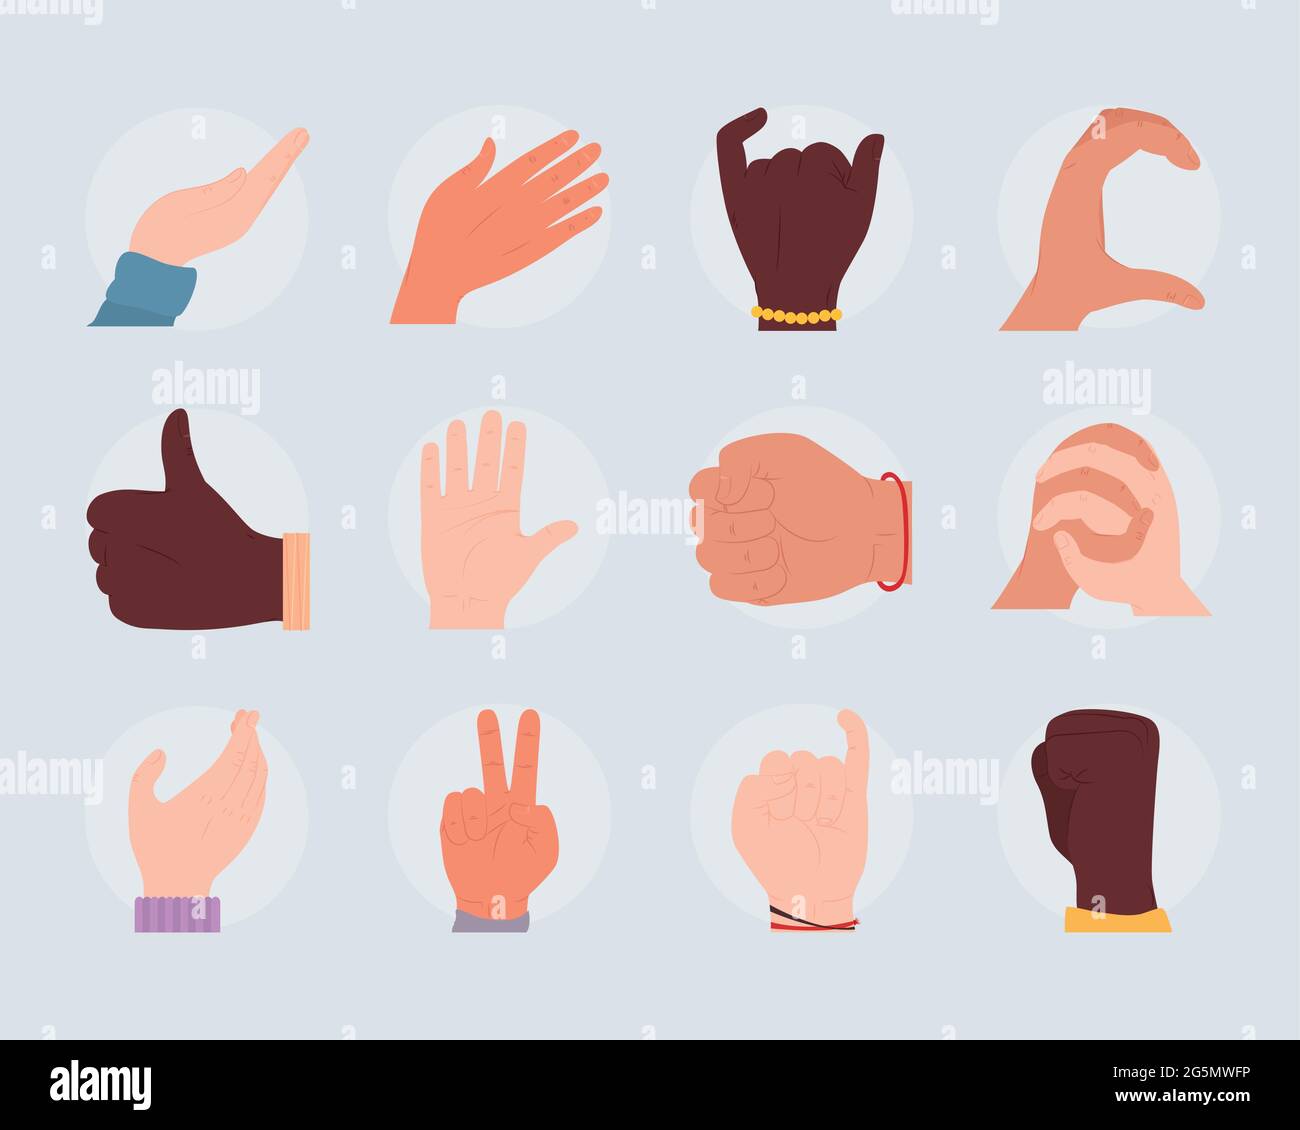 friendship hands gesture icon collection Stock Vector